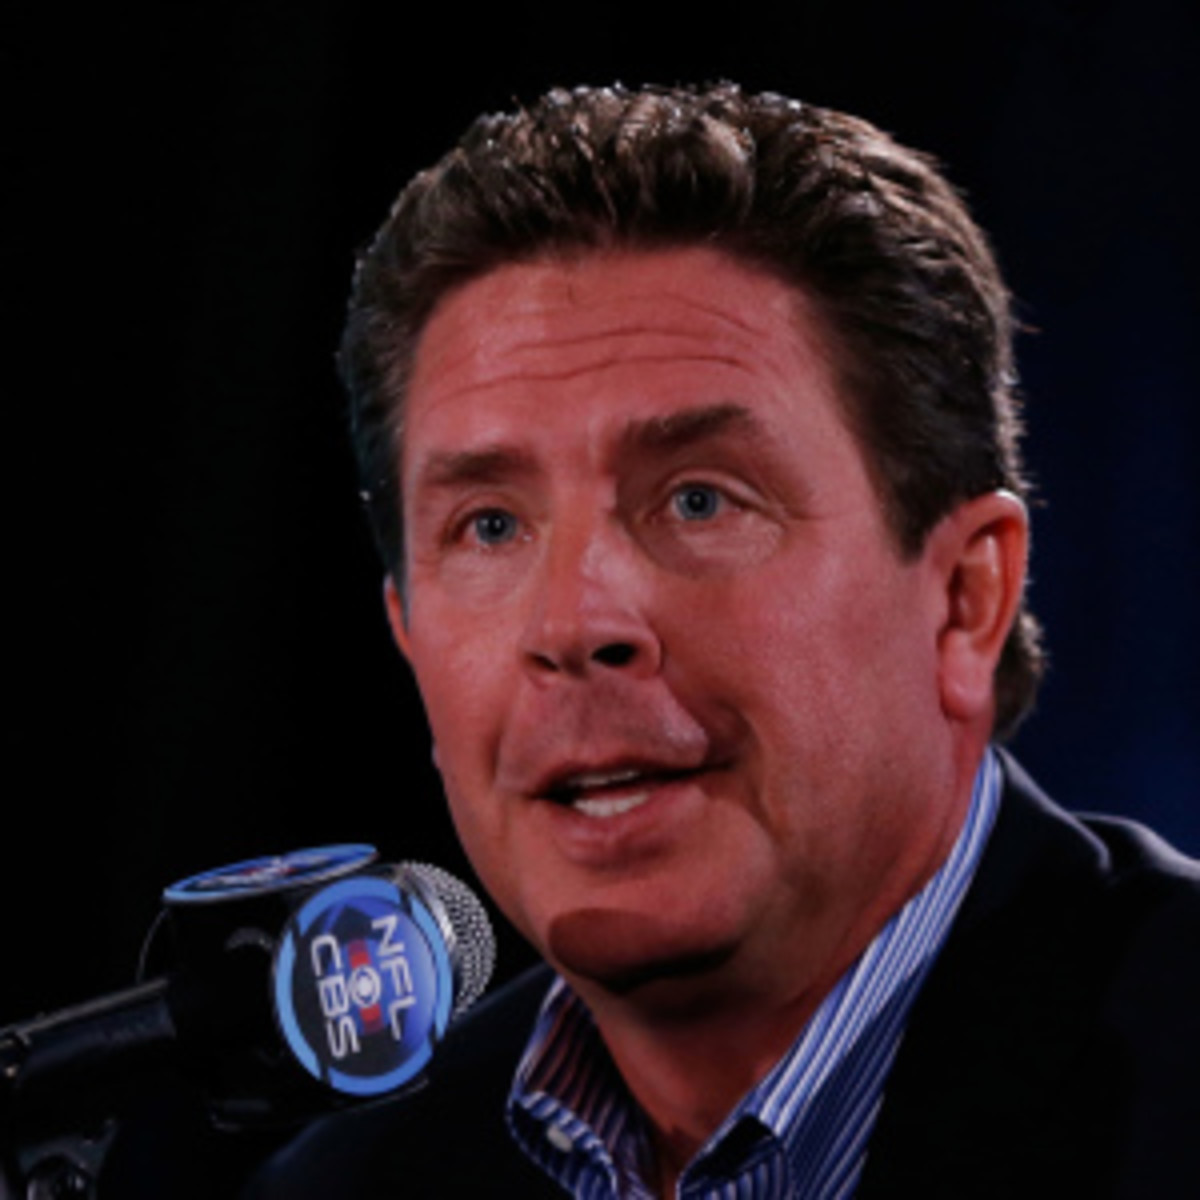 Dan Marino reportedly fathered a child with a CBS employee in 2005. (Scott Halleran/Getty Images)